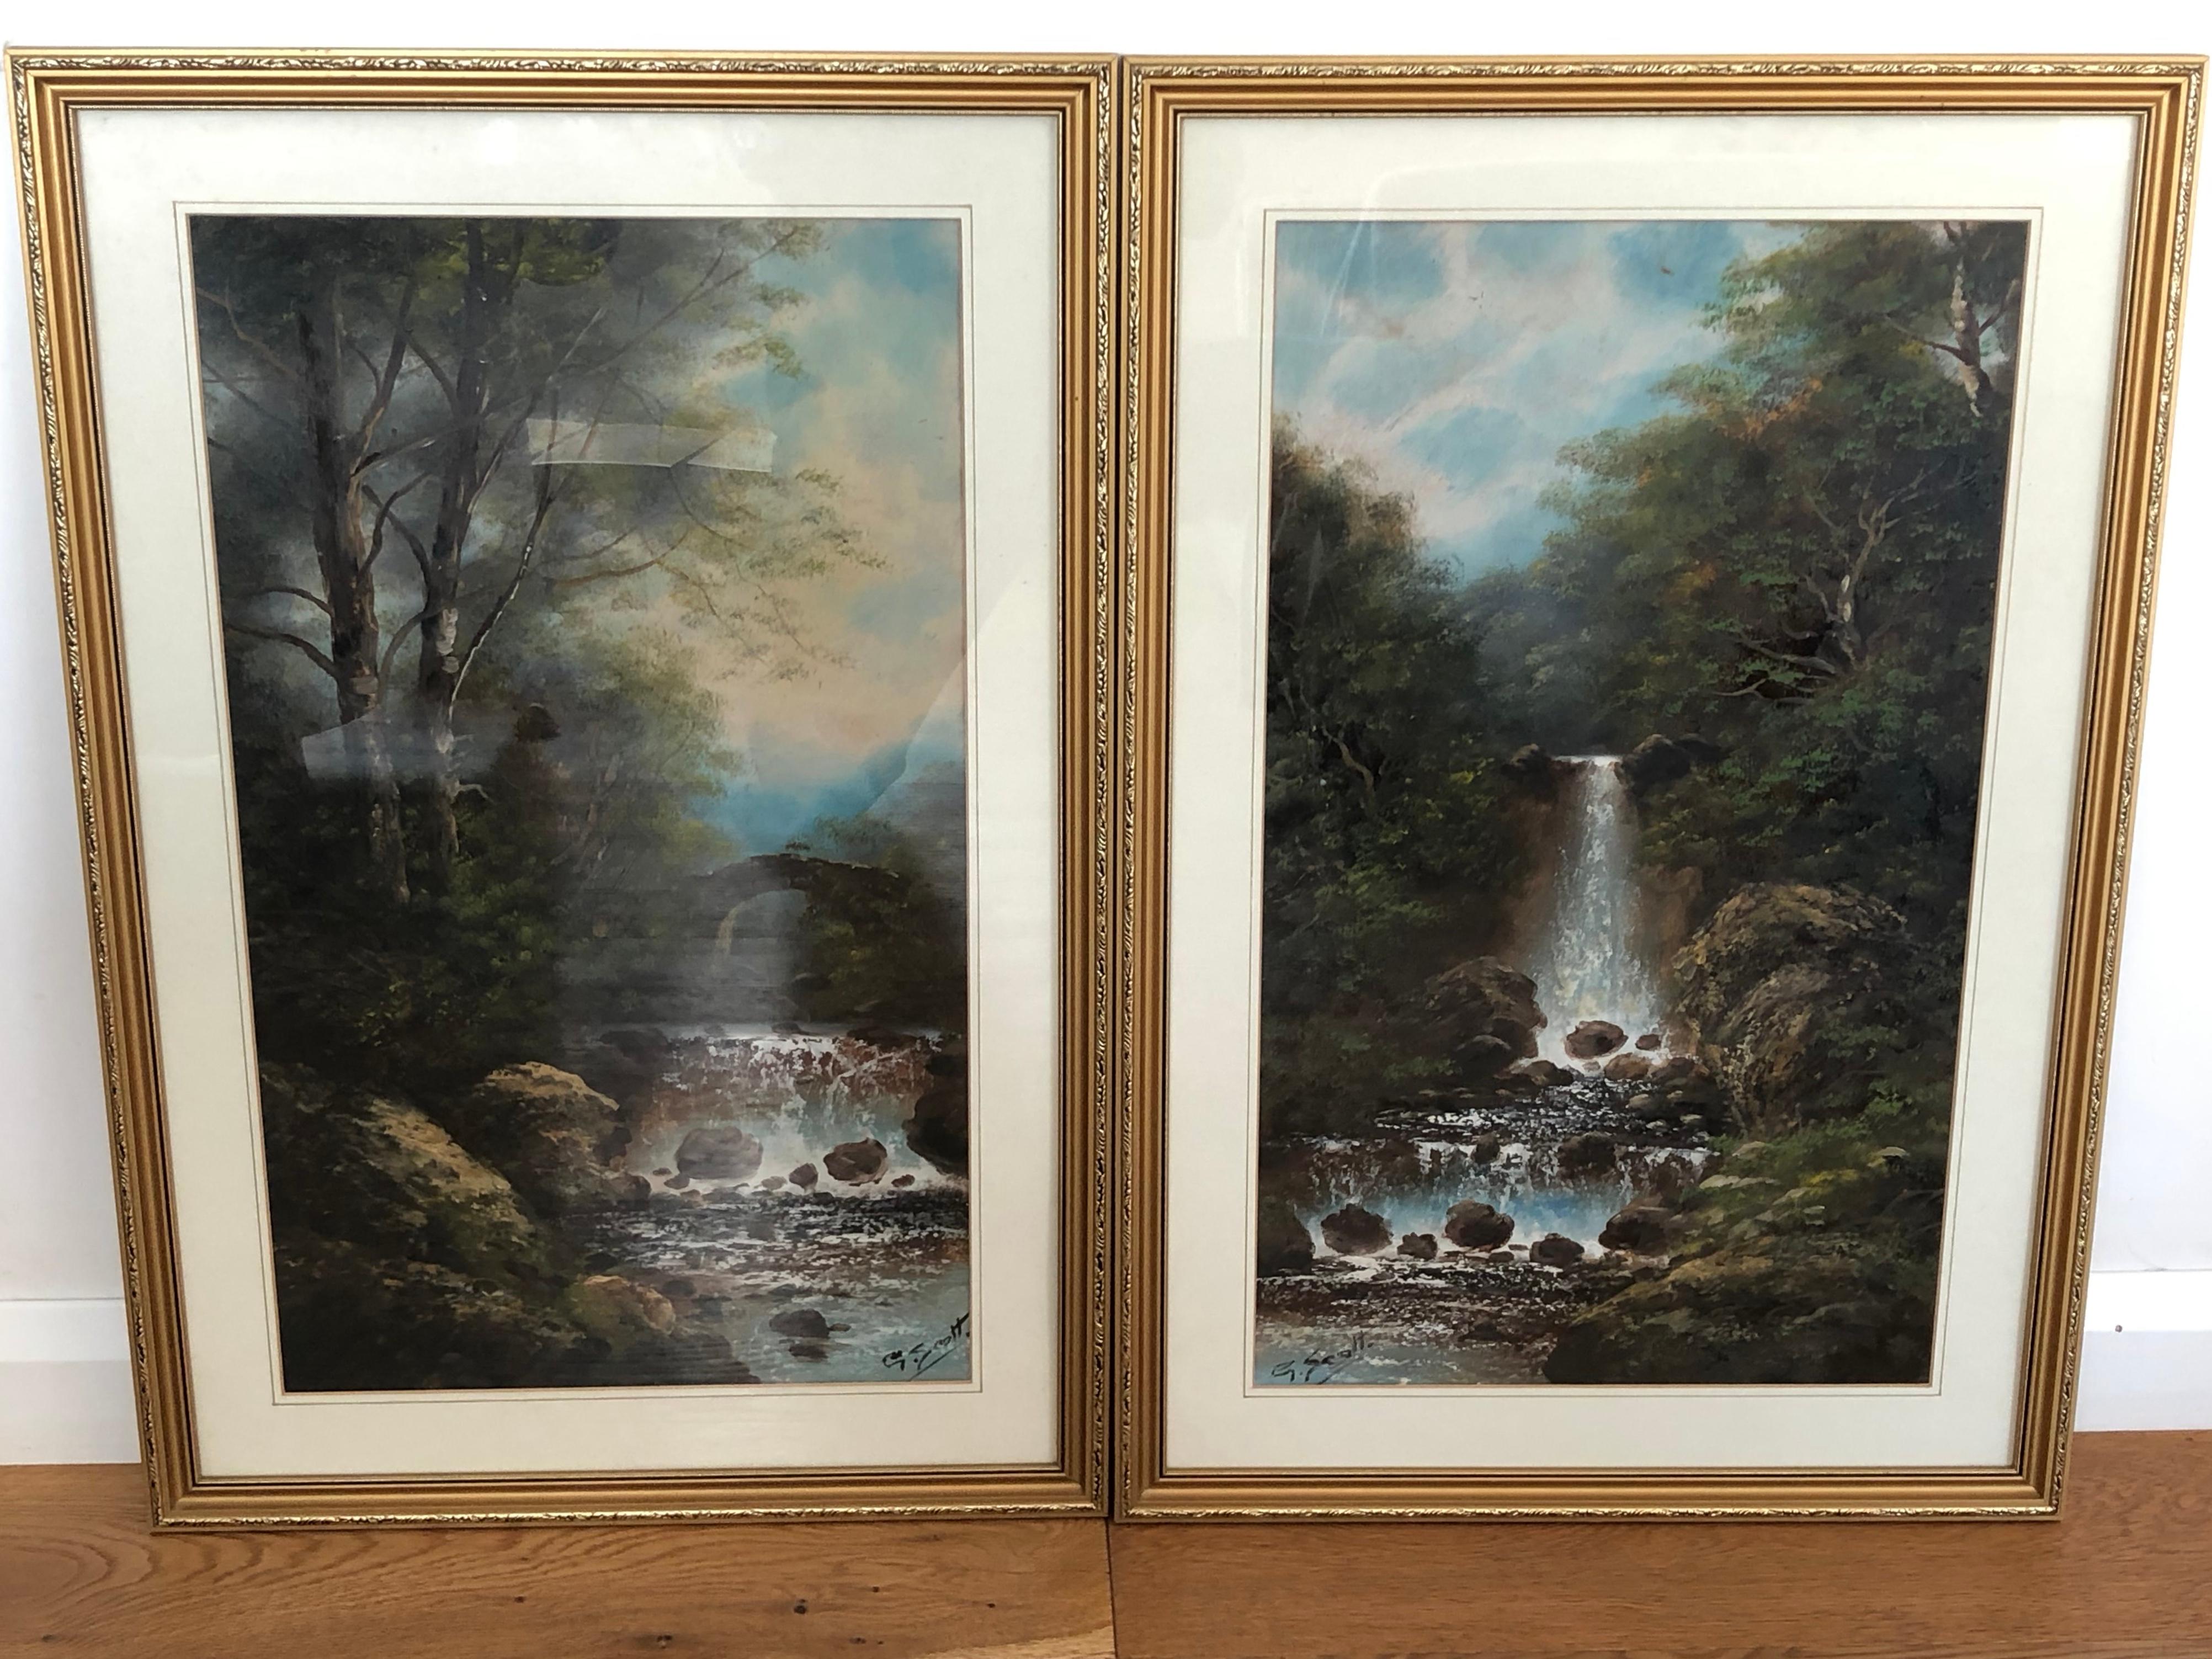 A pair of early 20th century English Landscapes. Watercolor on board, fair condition behind glass. Signed G Scott

Images 24